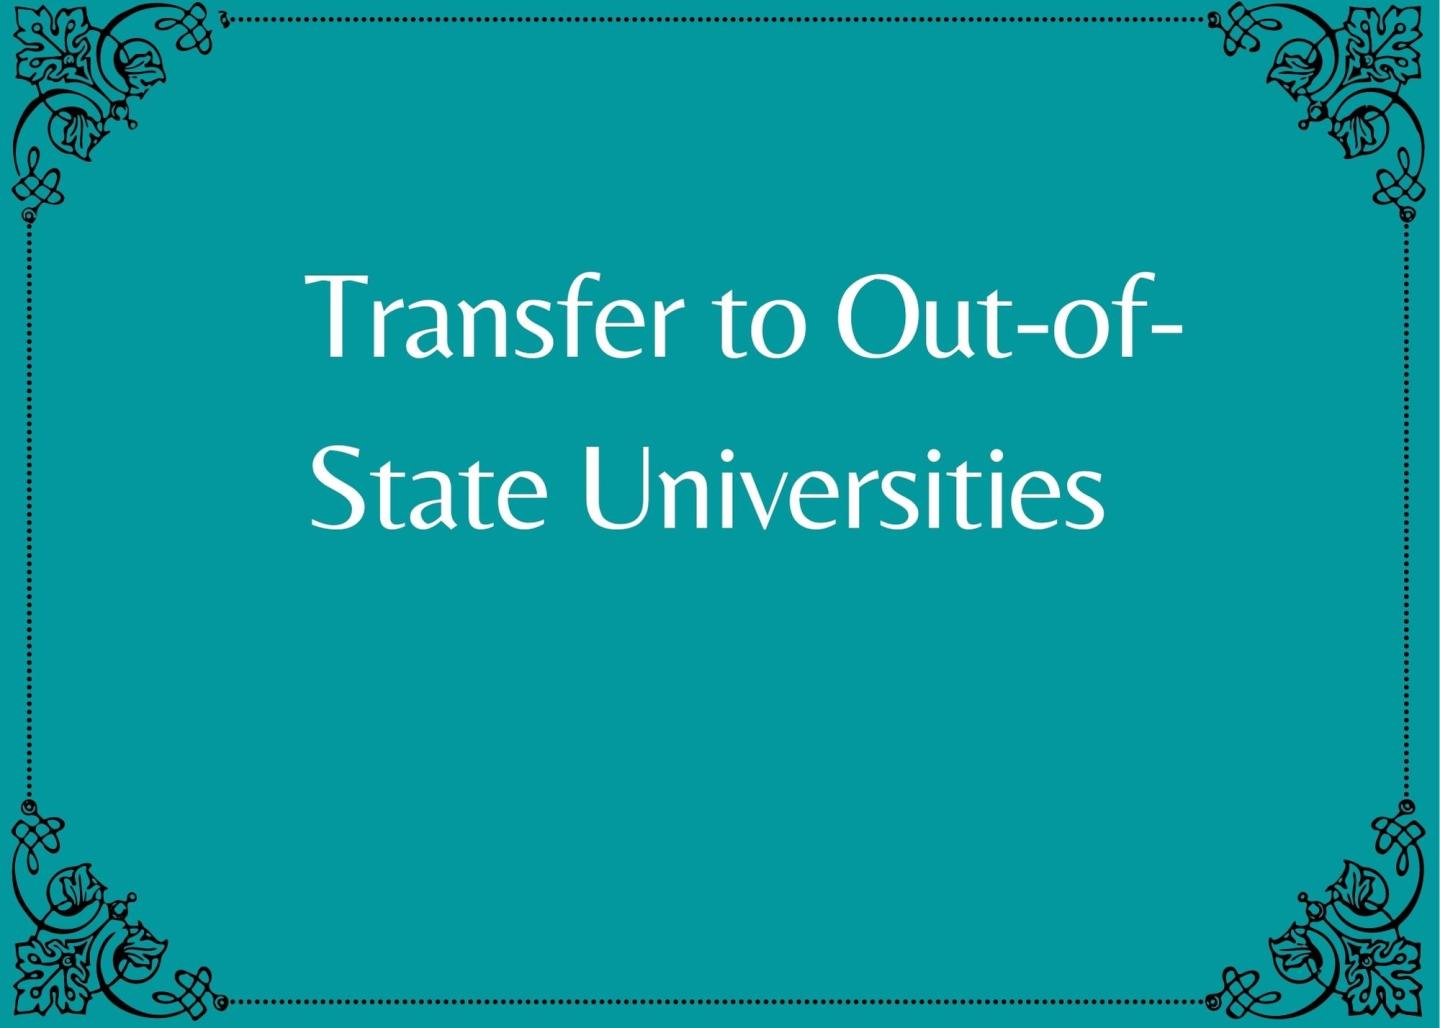 Transfer to Out-of-State University